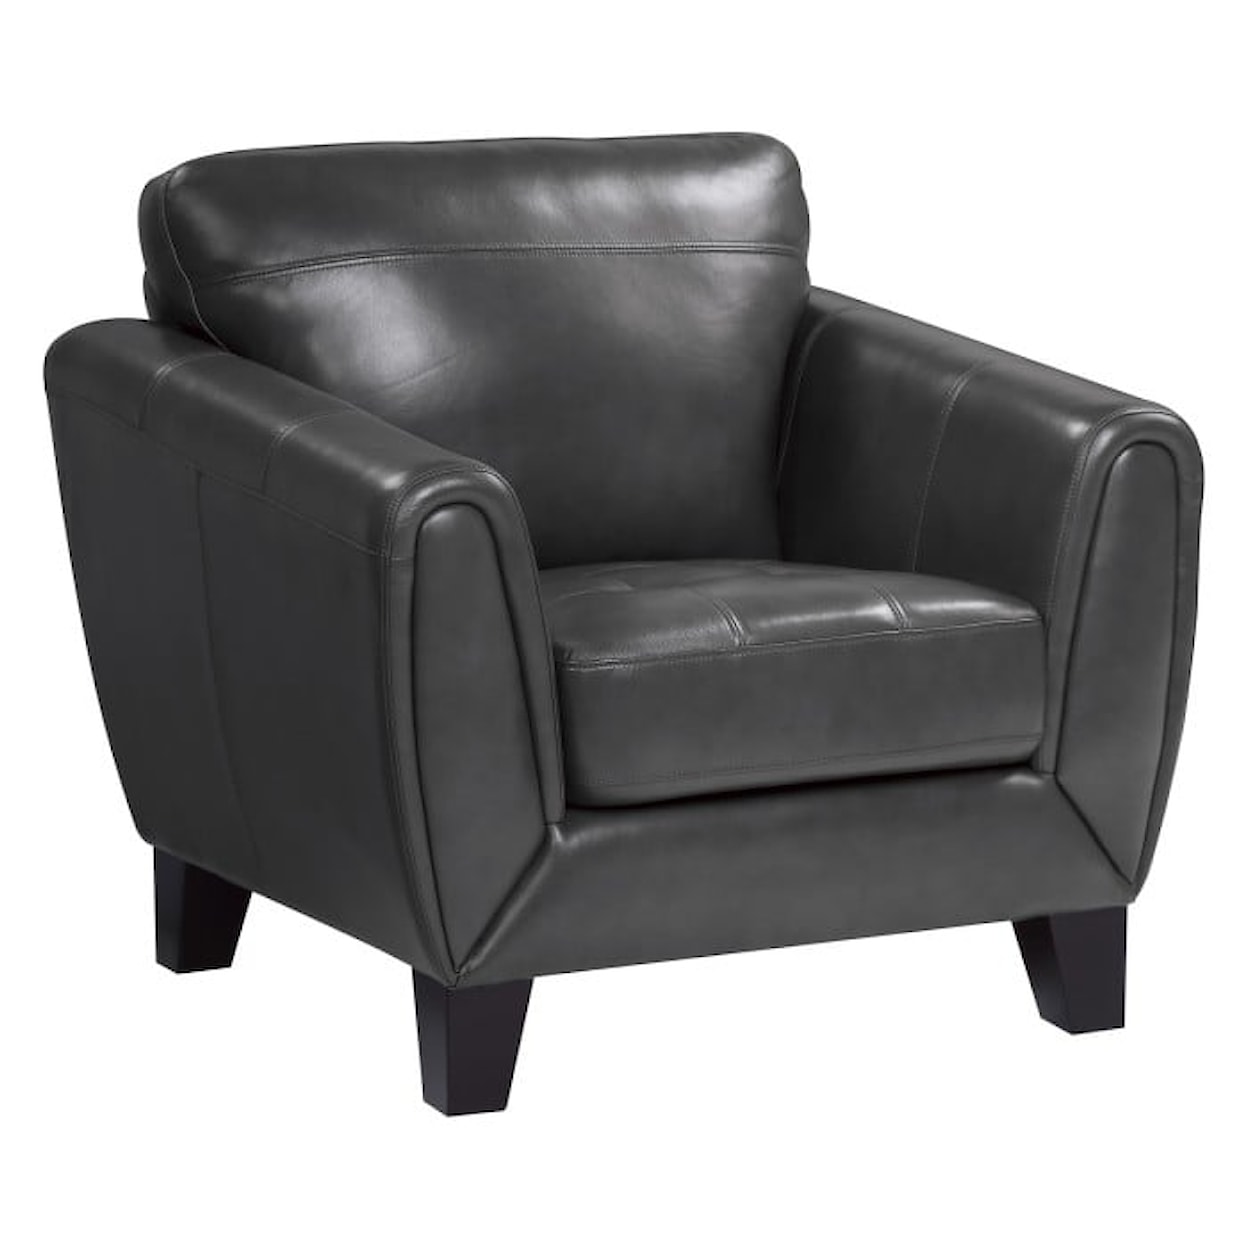 Homelegance Furniture Spivey Chair